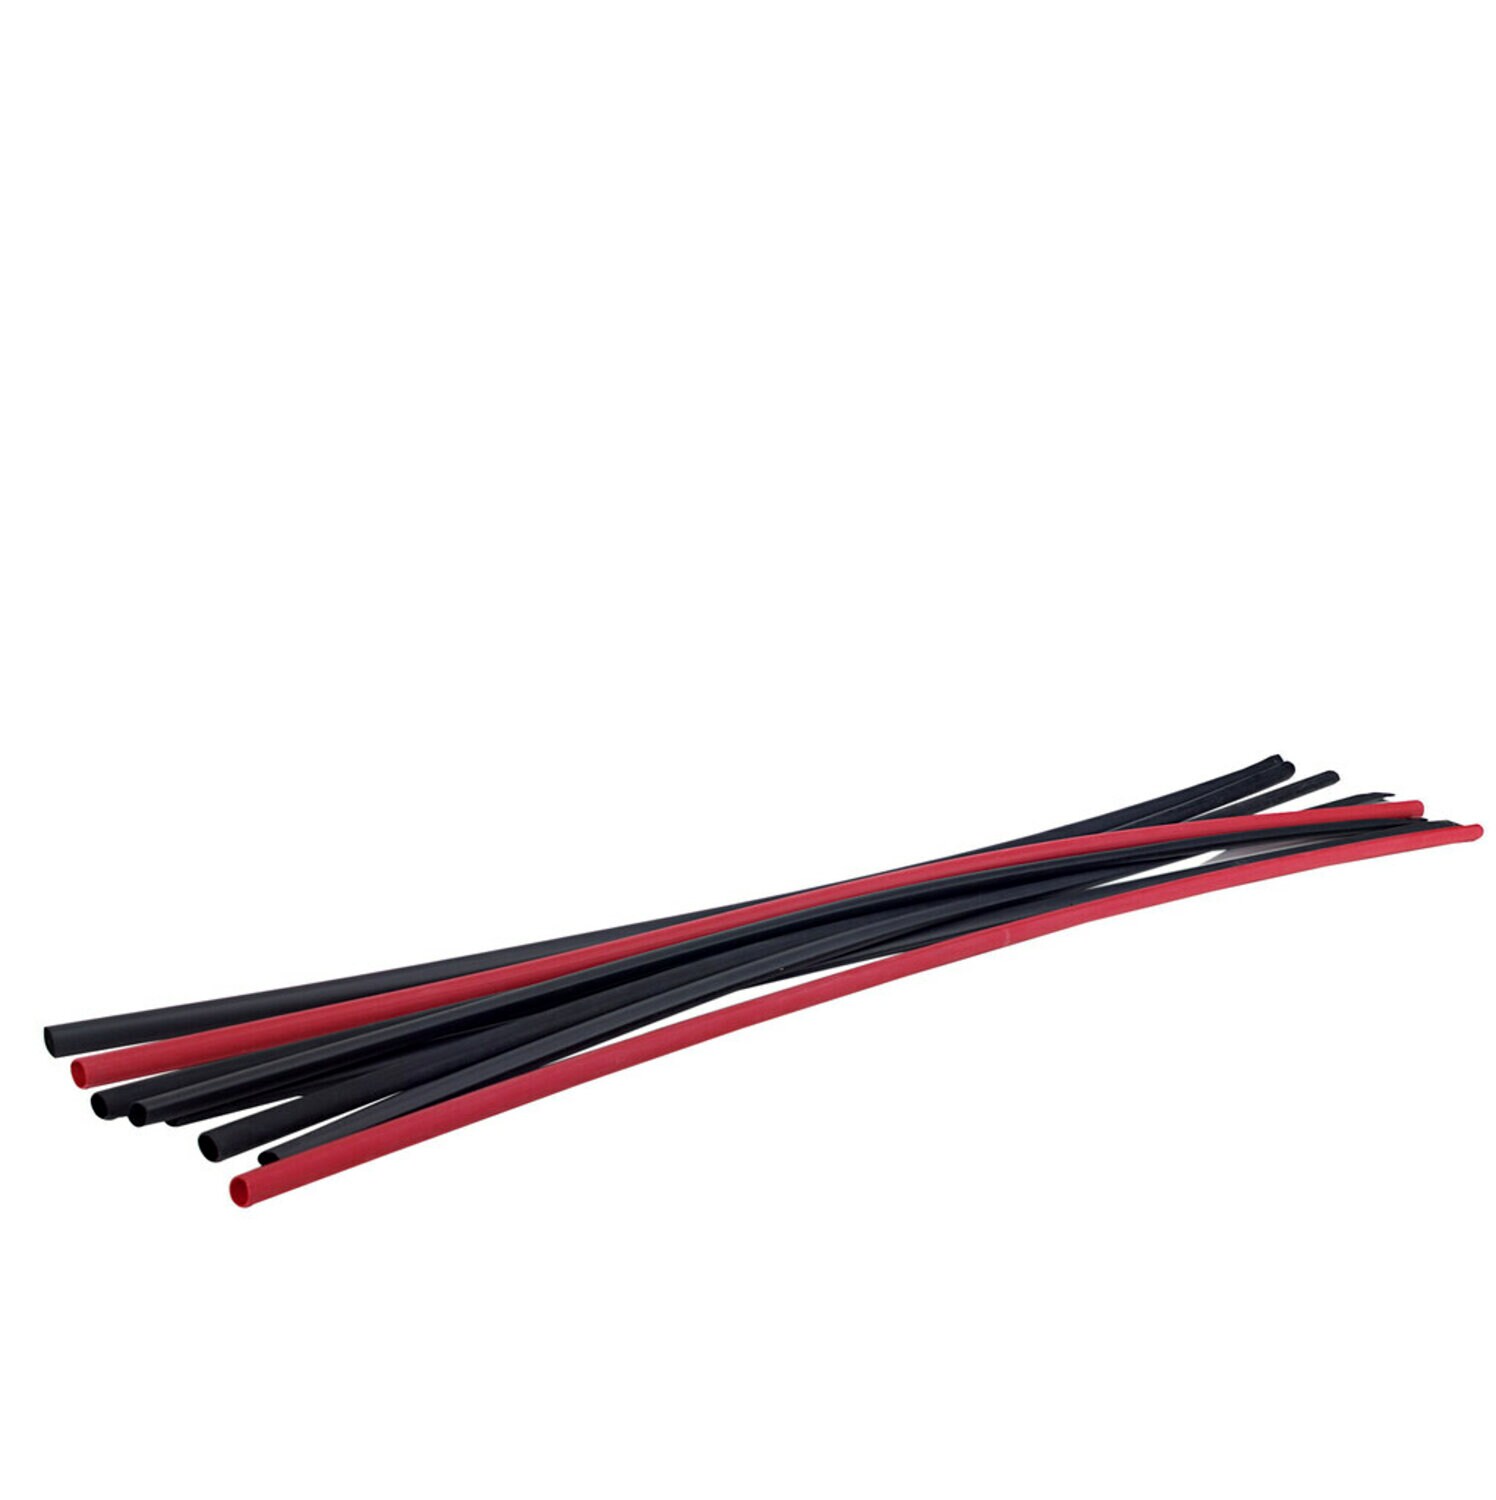 7010400840 - 3M Heat Shrink Thin-Wall Tubing FP-301-1/4-48"-Red-200 Pcs, 48 in
Length sticks, 200 pieces/case